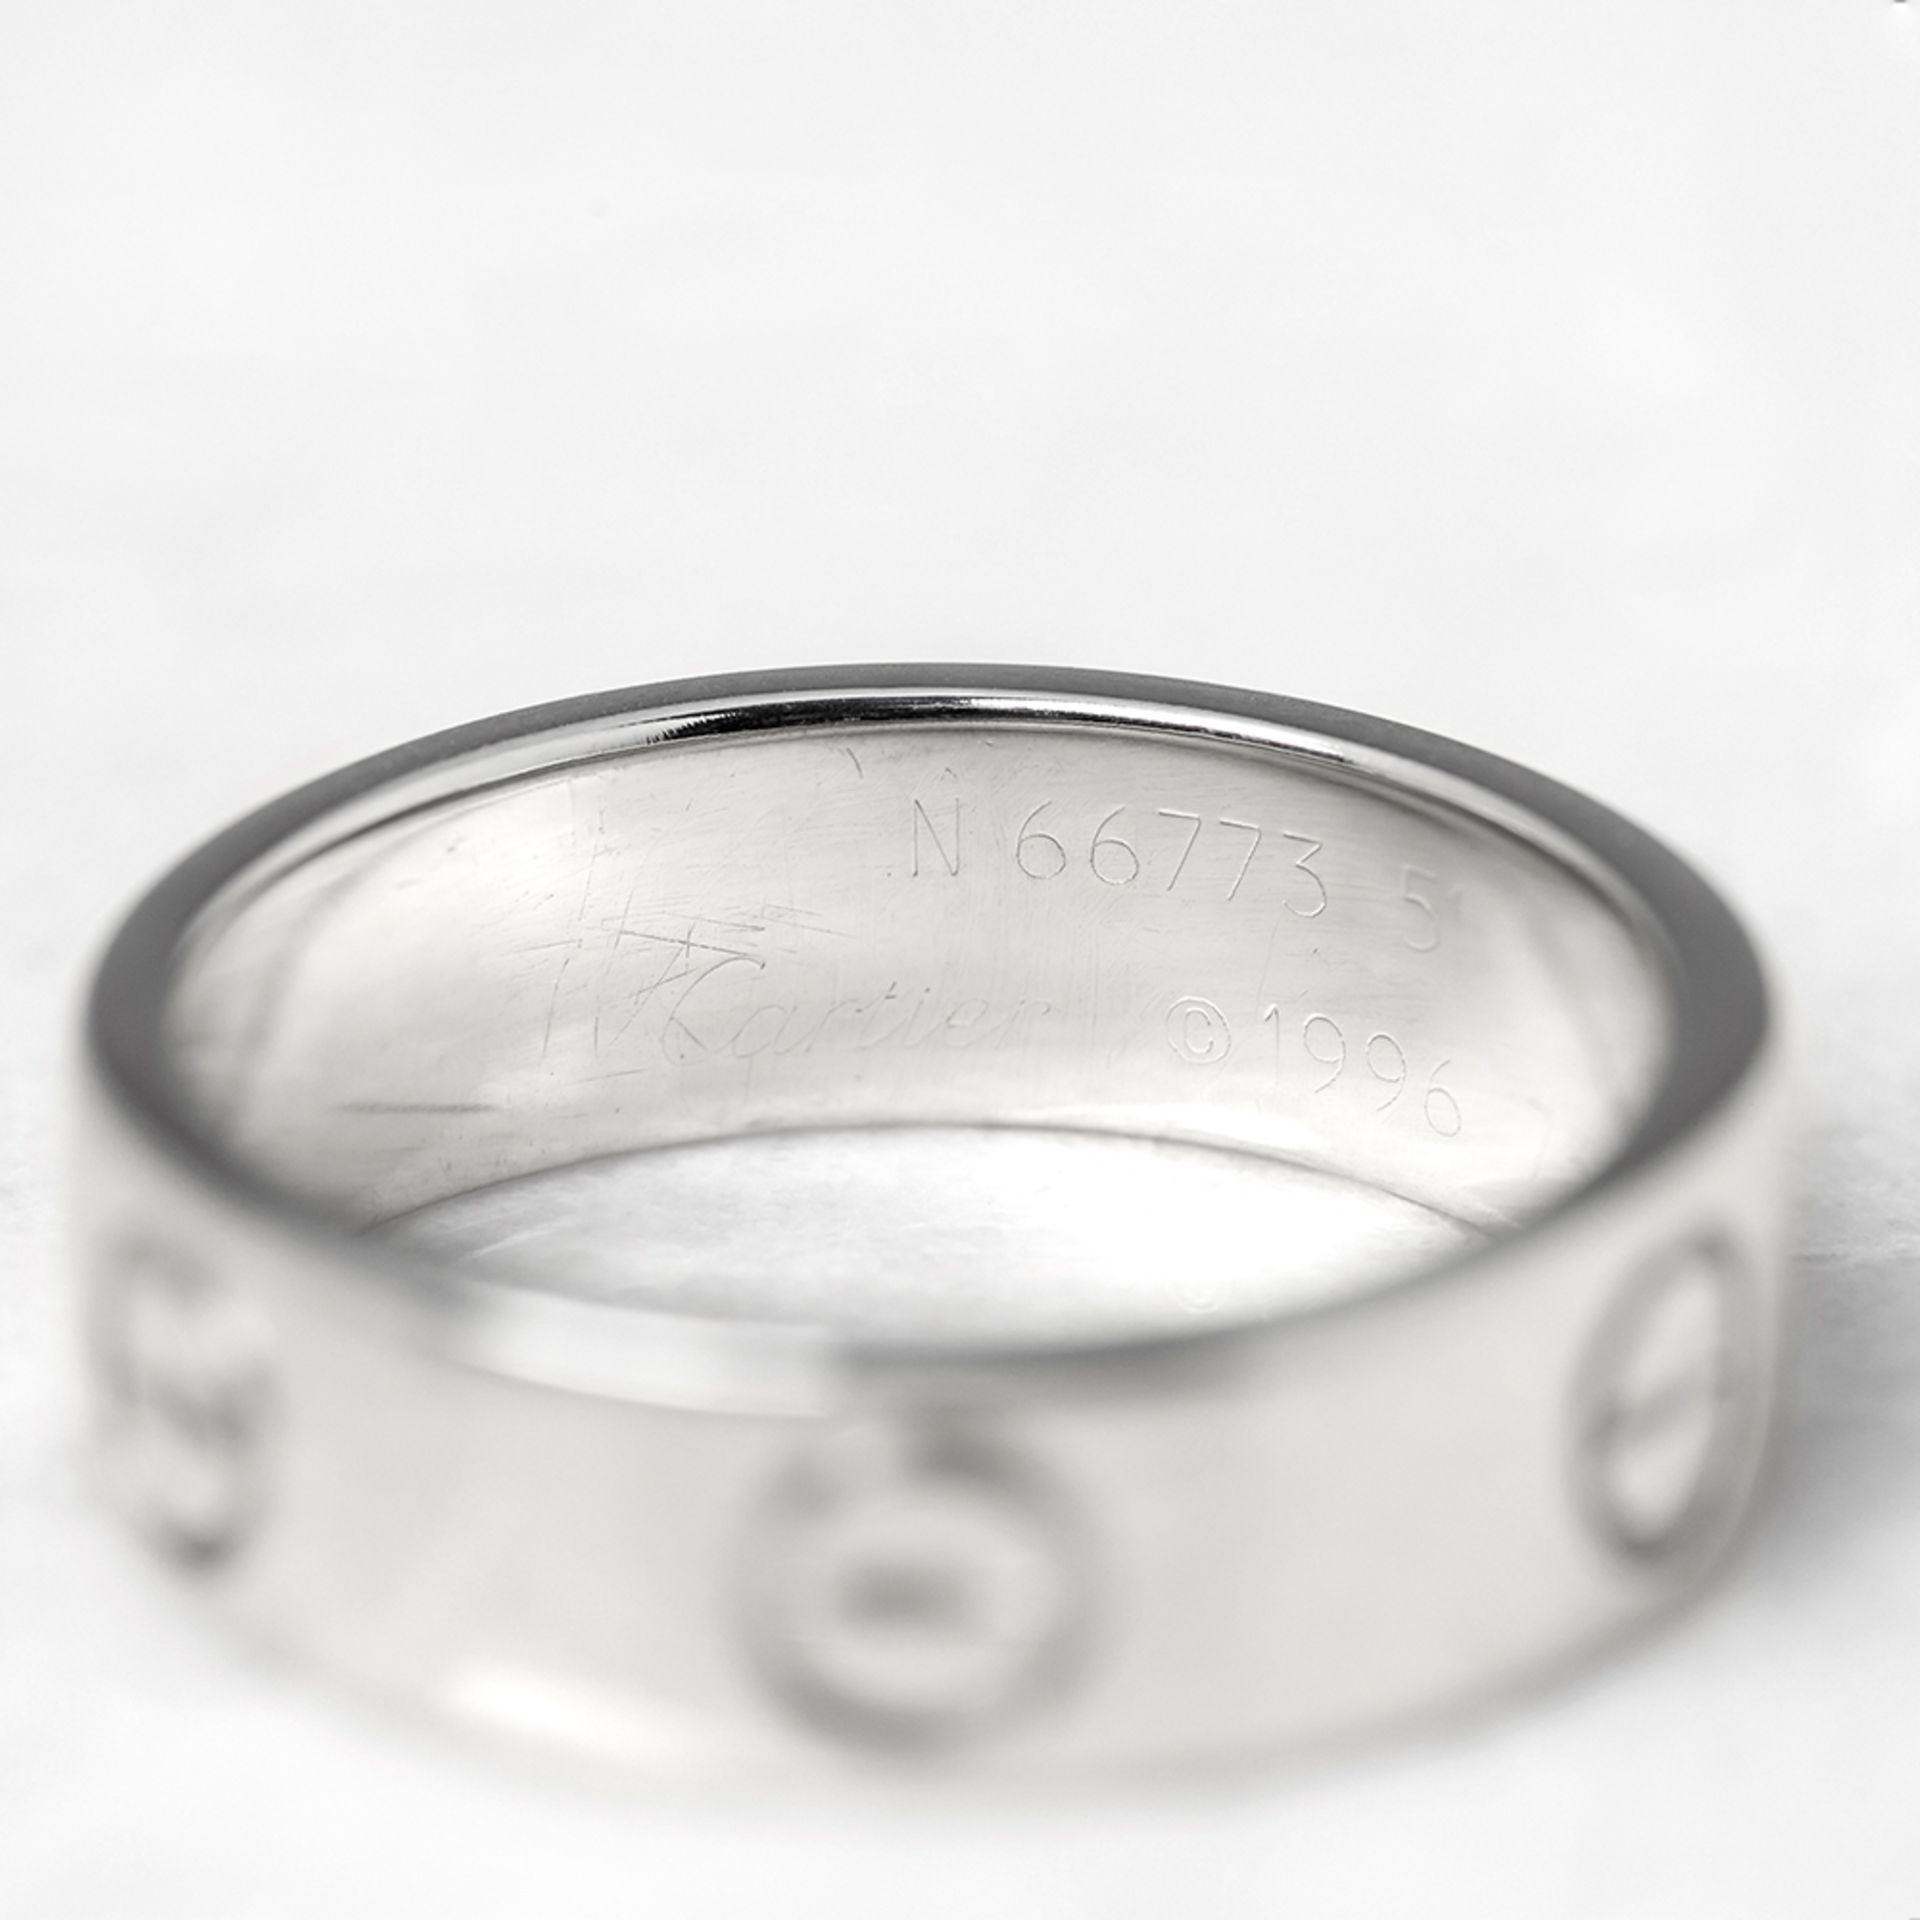 Cartier 18k White Gold Love Ring - Image 6 of 6